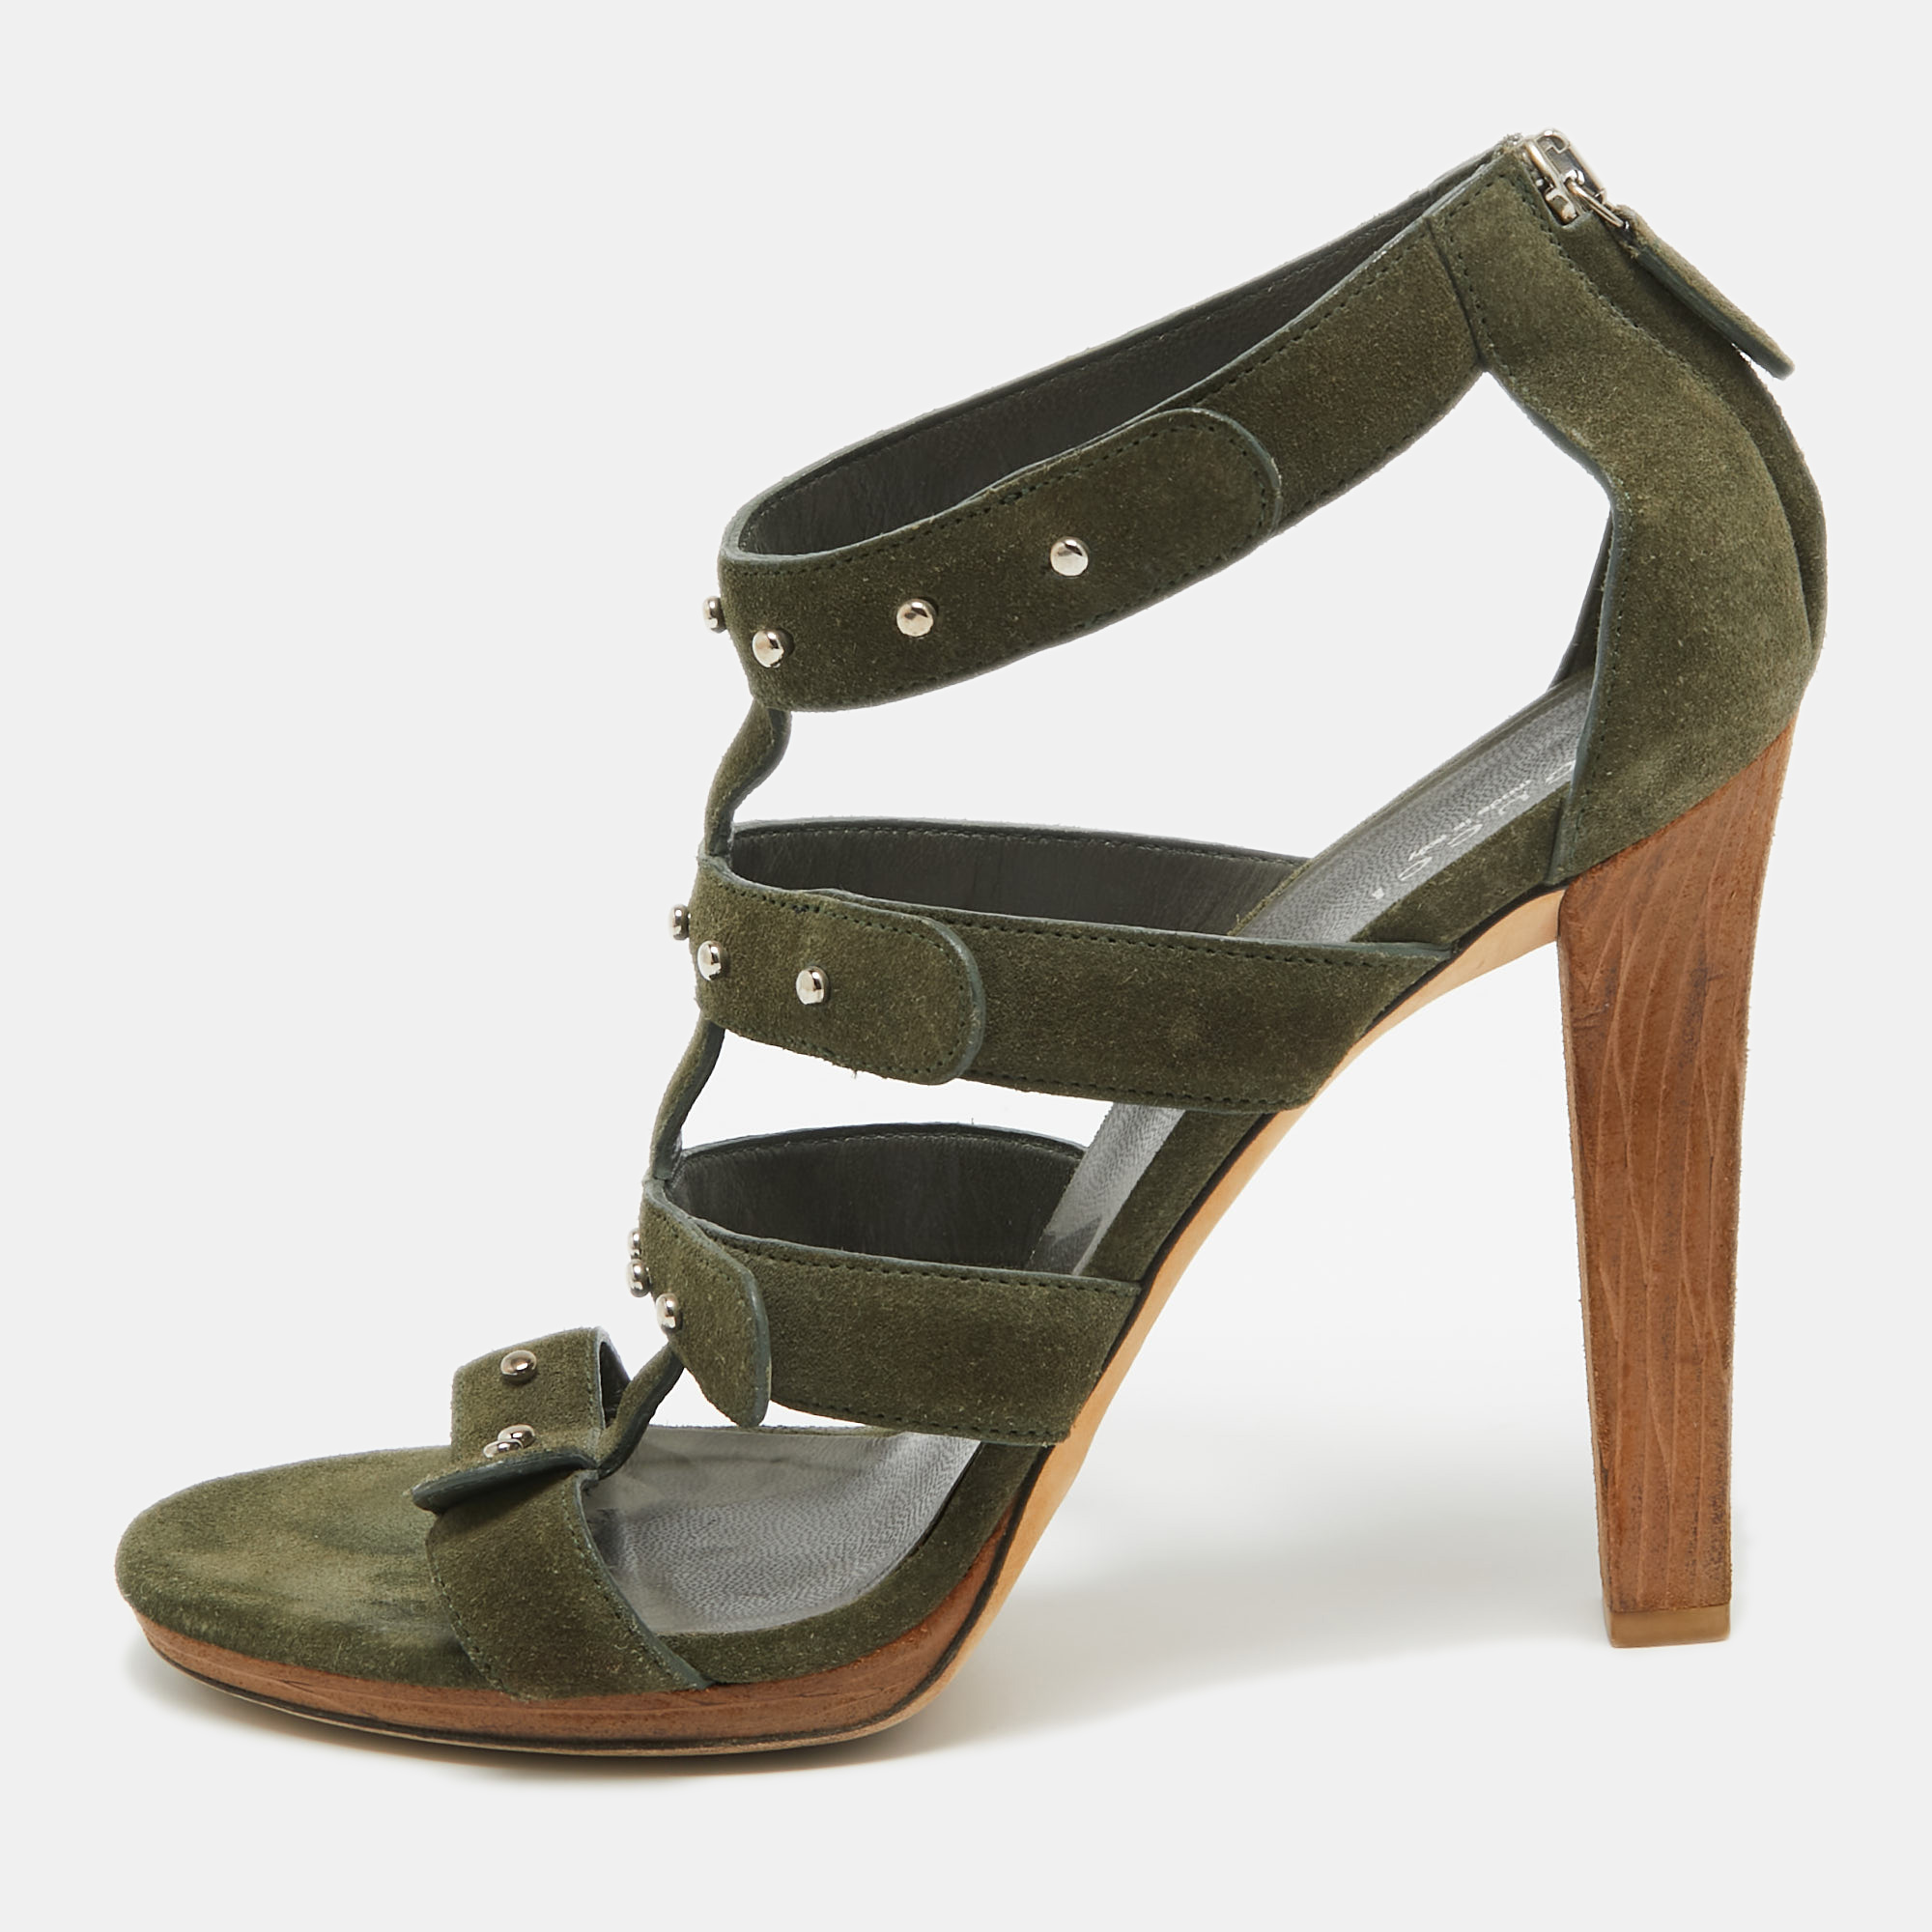 Gucci green suede gladiator ankle sandals size 40.5